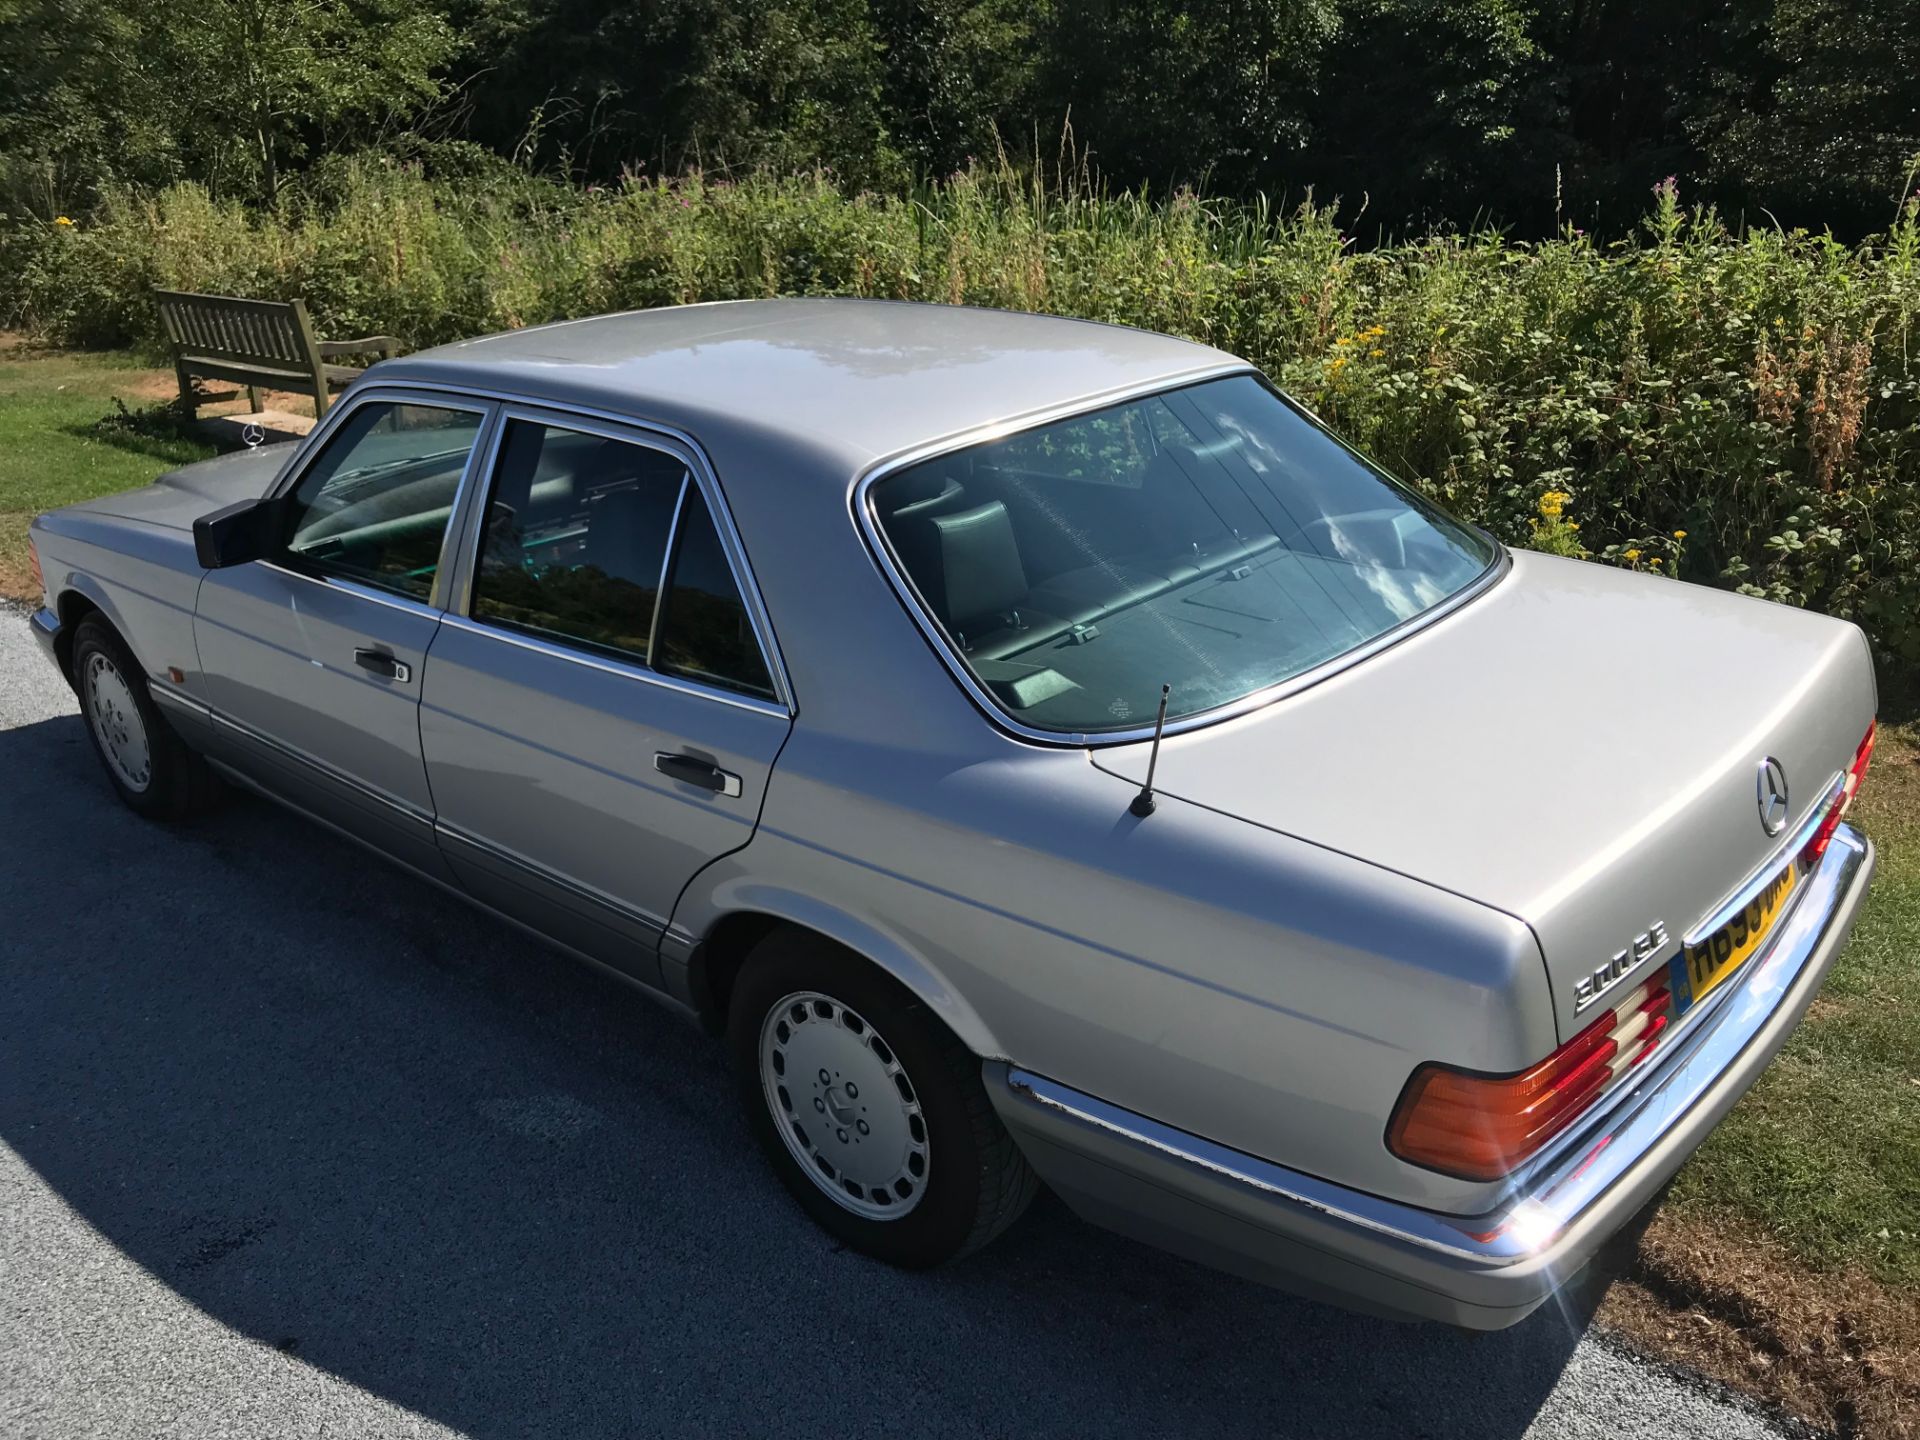 Mercedes 300 SE Automatic - Image 21 of 69